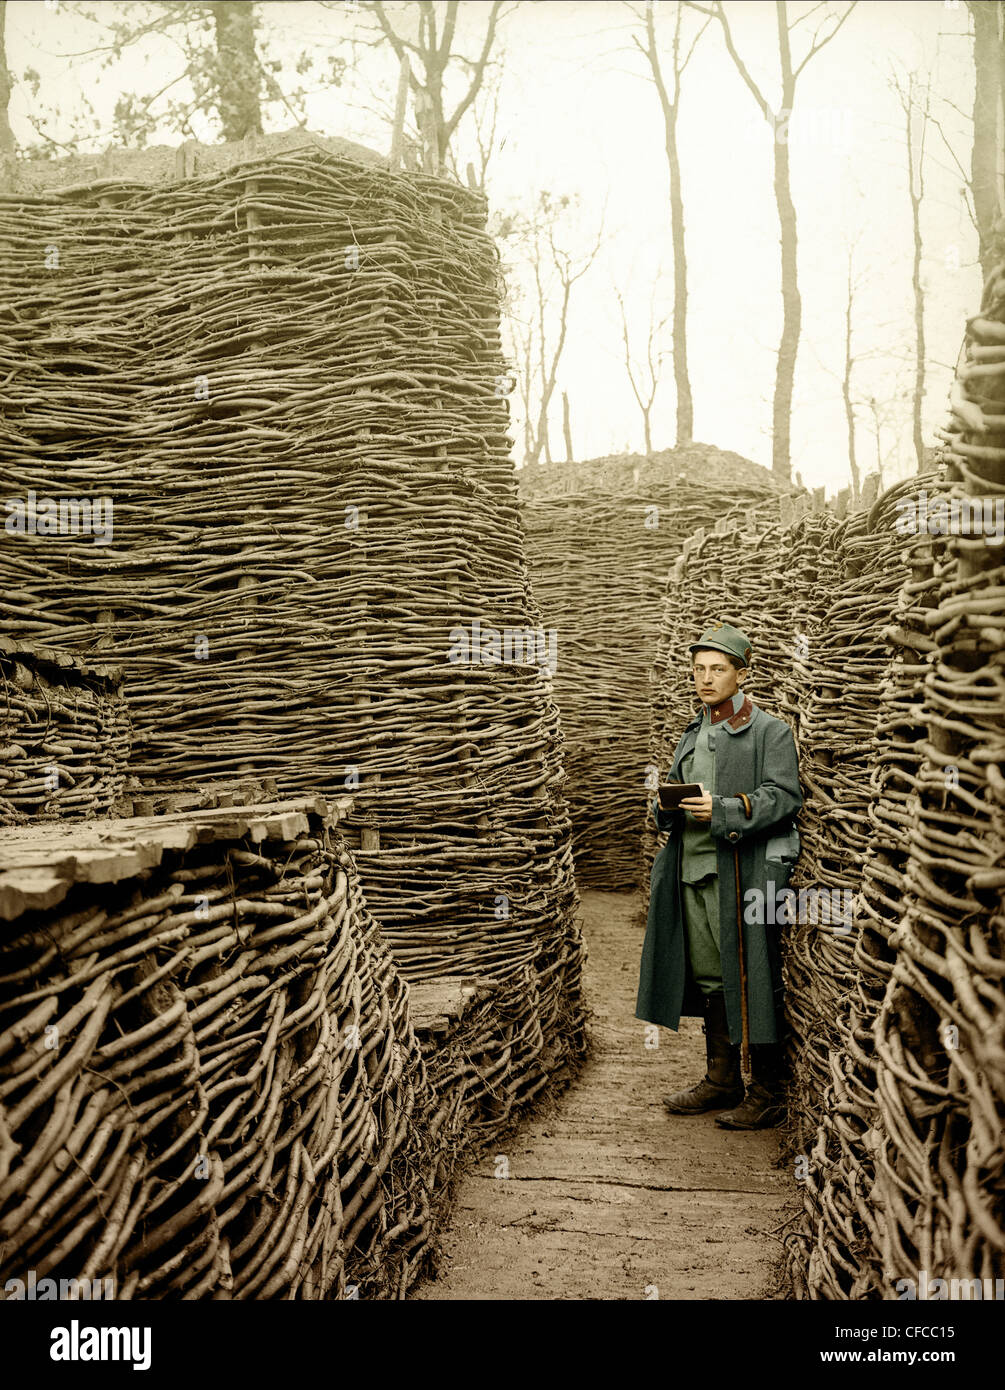 Austrian, soldier, army, military, trench, eastern front, secured, fascines, rough, bundle of brushwood, World War I, War, World Stock Photo